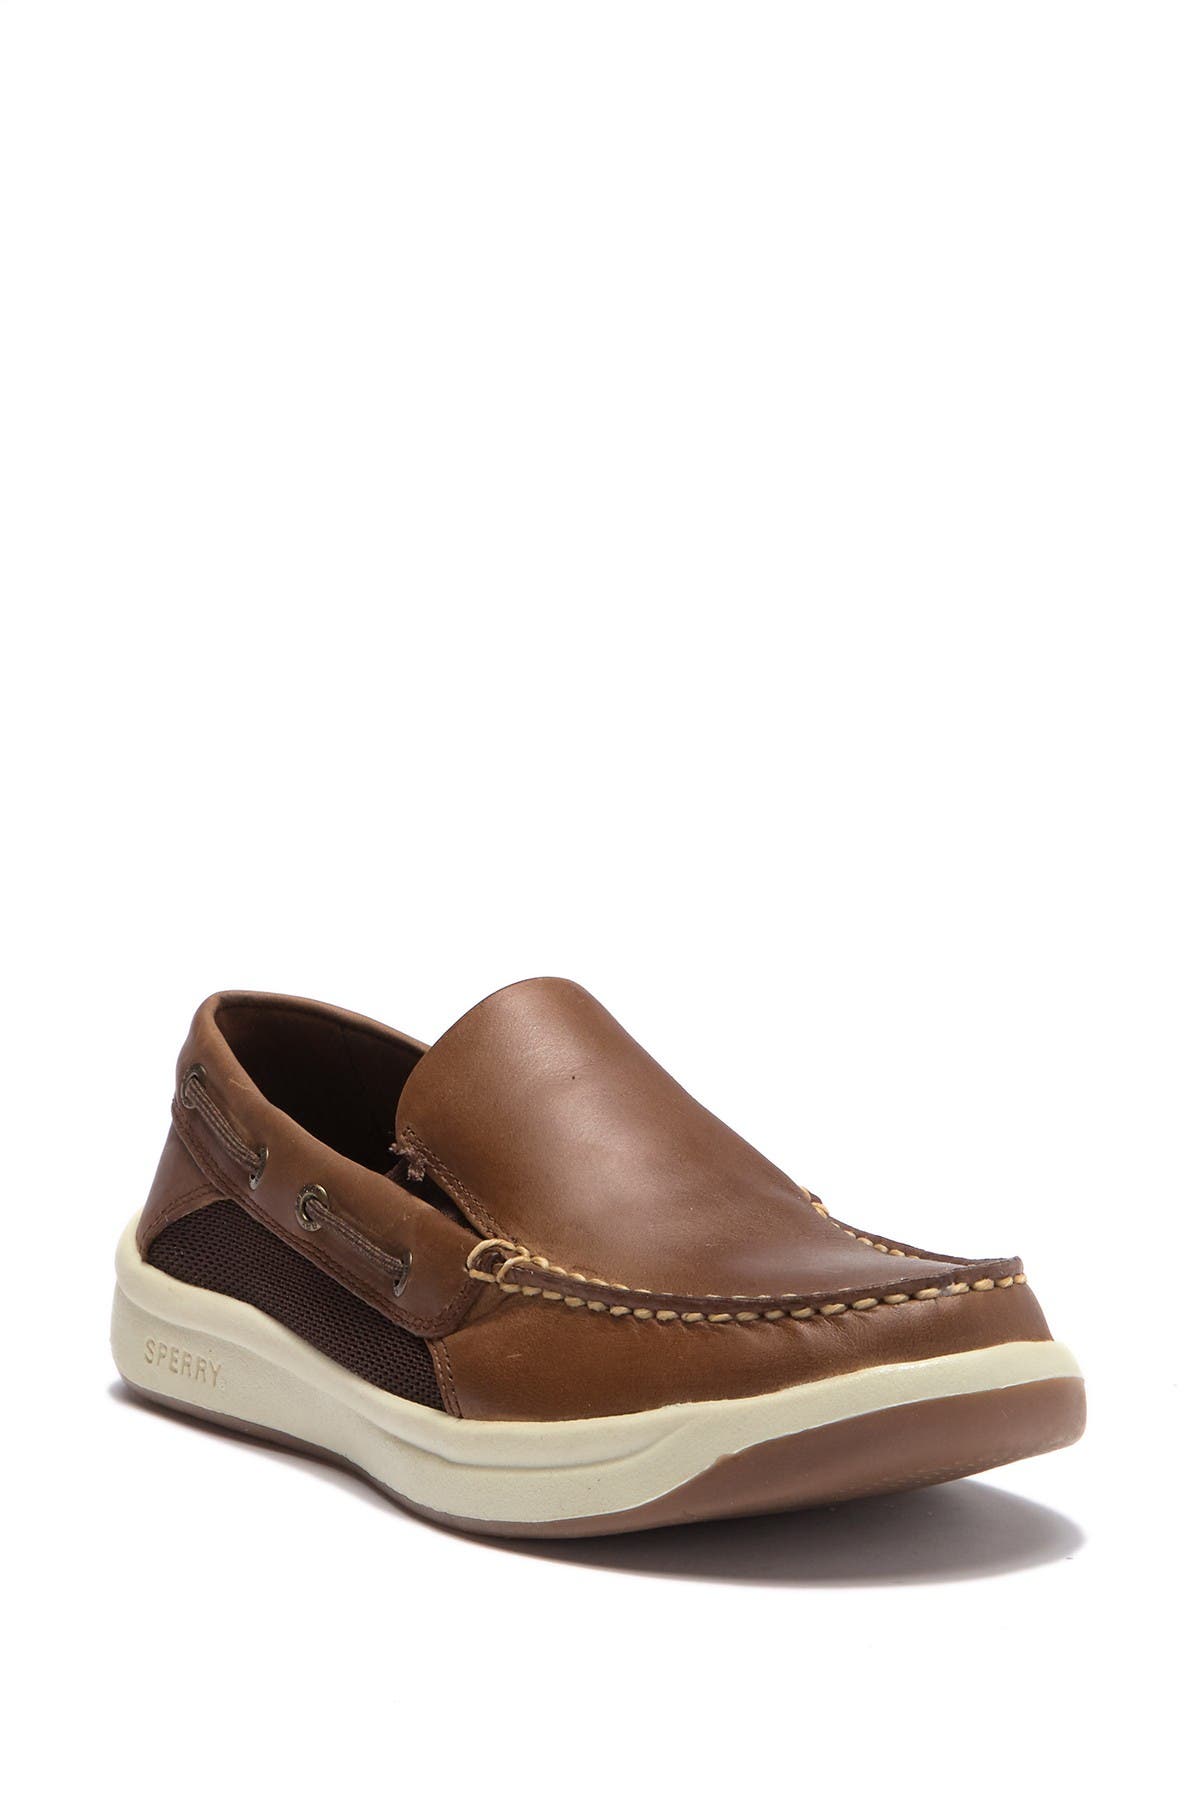 Sperry | Convoy Slip-On Leather Boat 